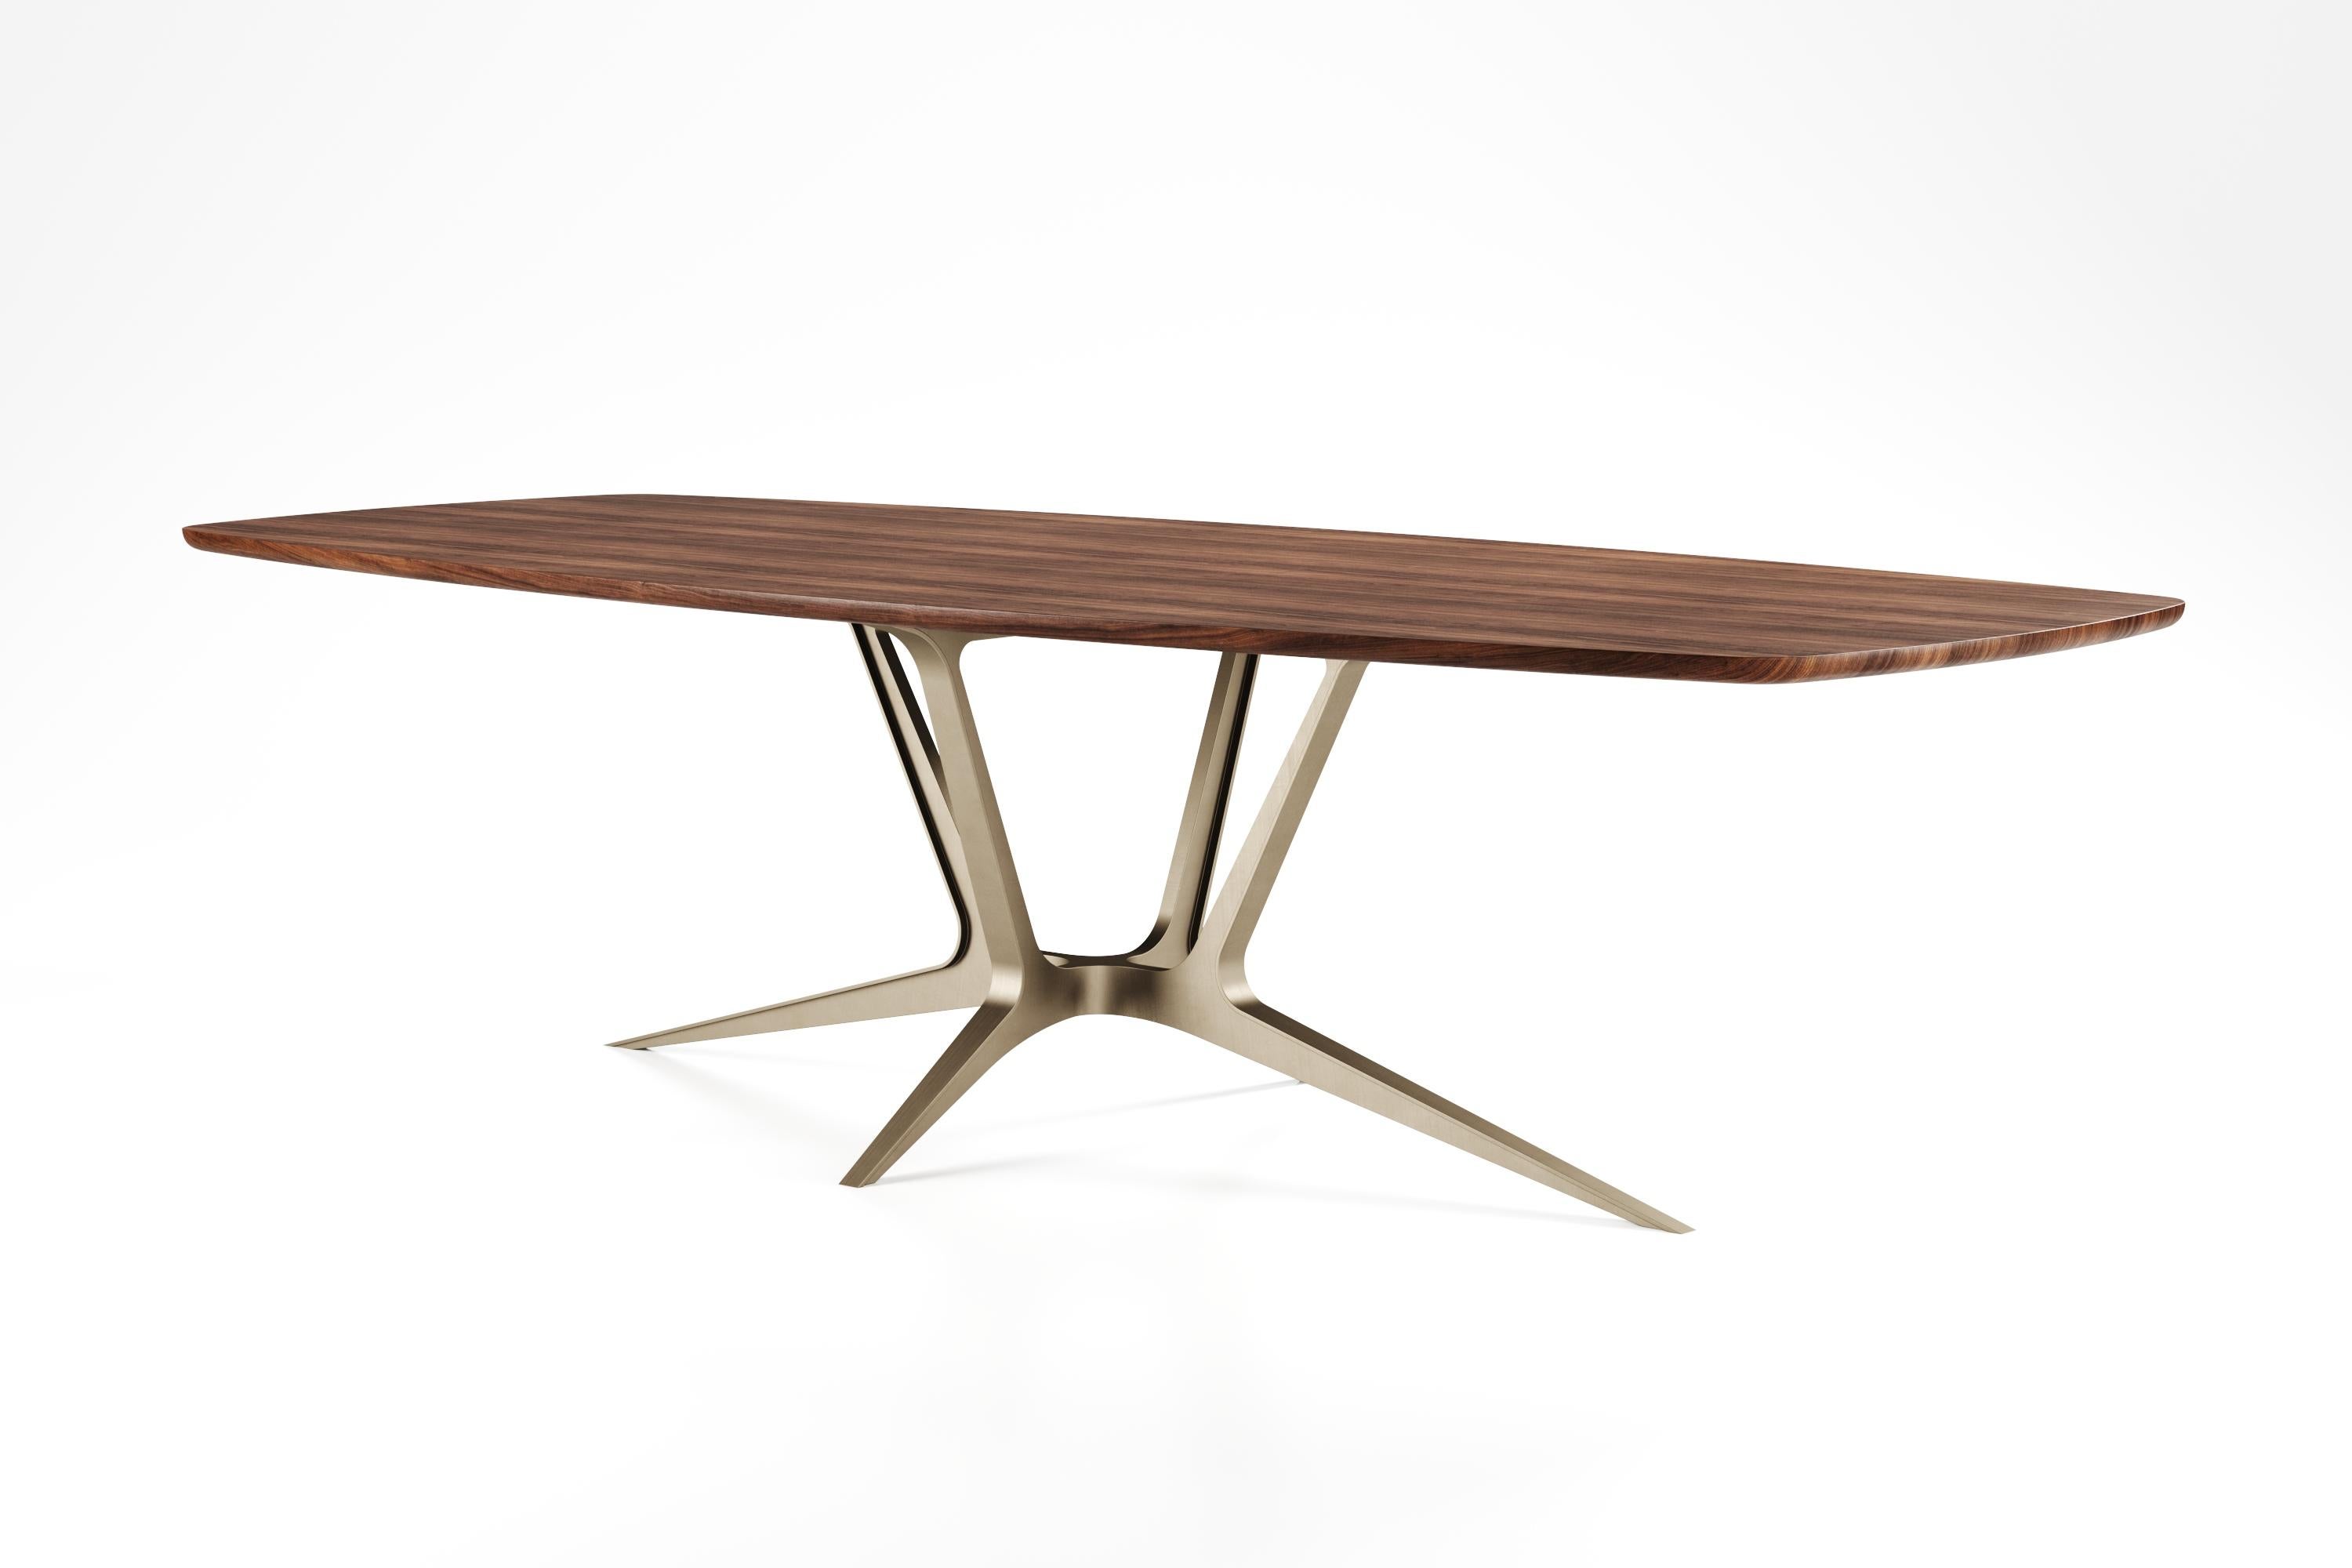 The Ero dining table is part of Luteca's Studio series, which is largely inspired by the work of Eugenio Escudero. This series beautifully exemplifies the international perspective that is so important to our company.. It feels familiar and yet you